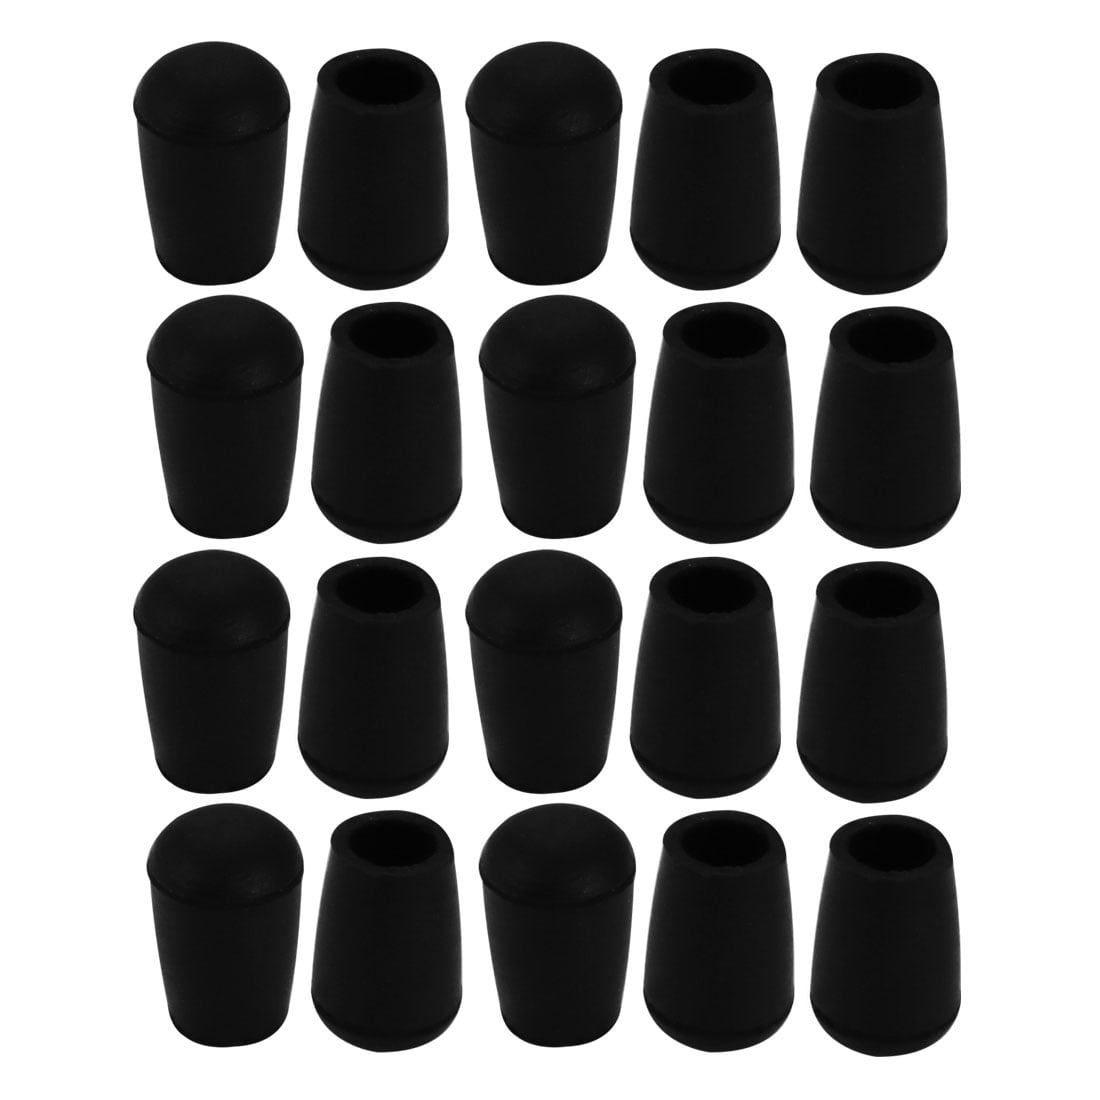 20PCS Black Chair Couch Table Rubber Furniture Leg End Caps 8mm inner Dia N3 